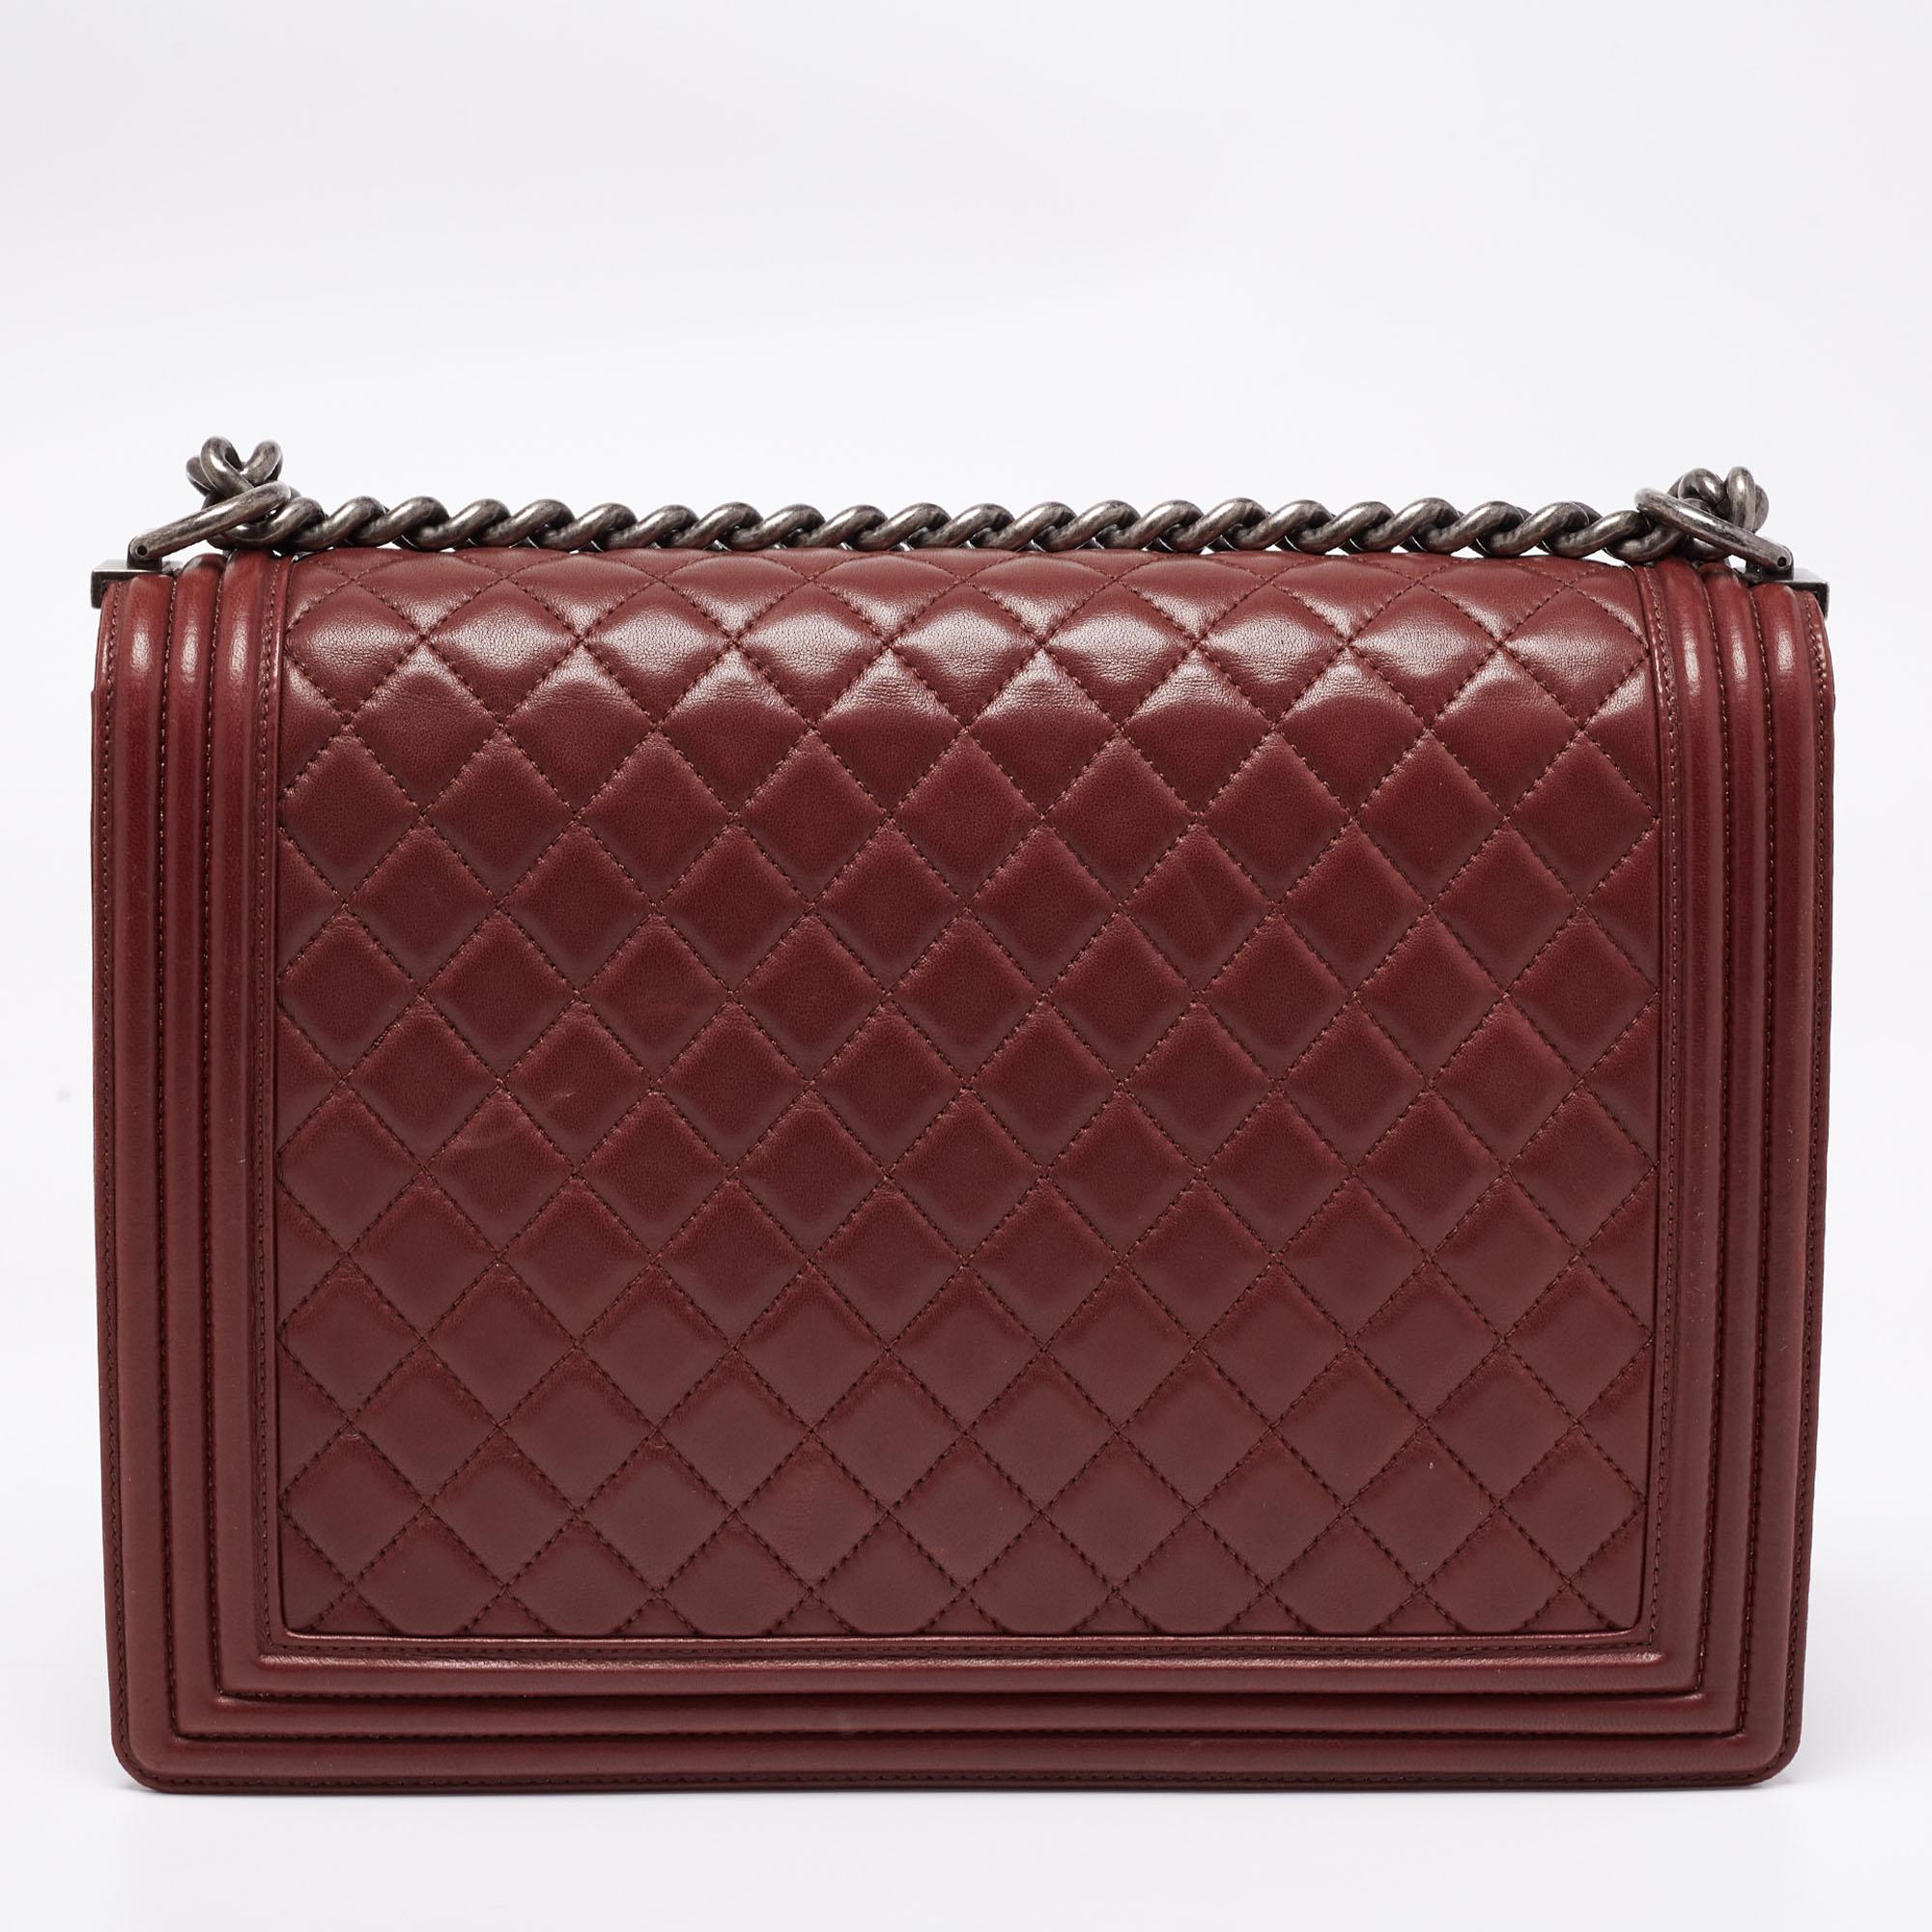 Introduced as a part of the Chanel Fall/Winter collection of 2011, the Boy flap bag embodies an alluring appeal and is complemented with exquisite details. This burgundy creation is meticulously crafted from quilted leather with side paneling and